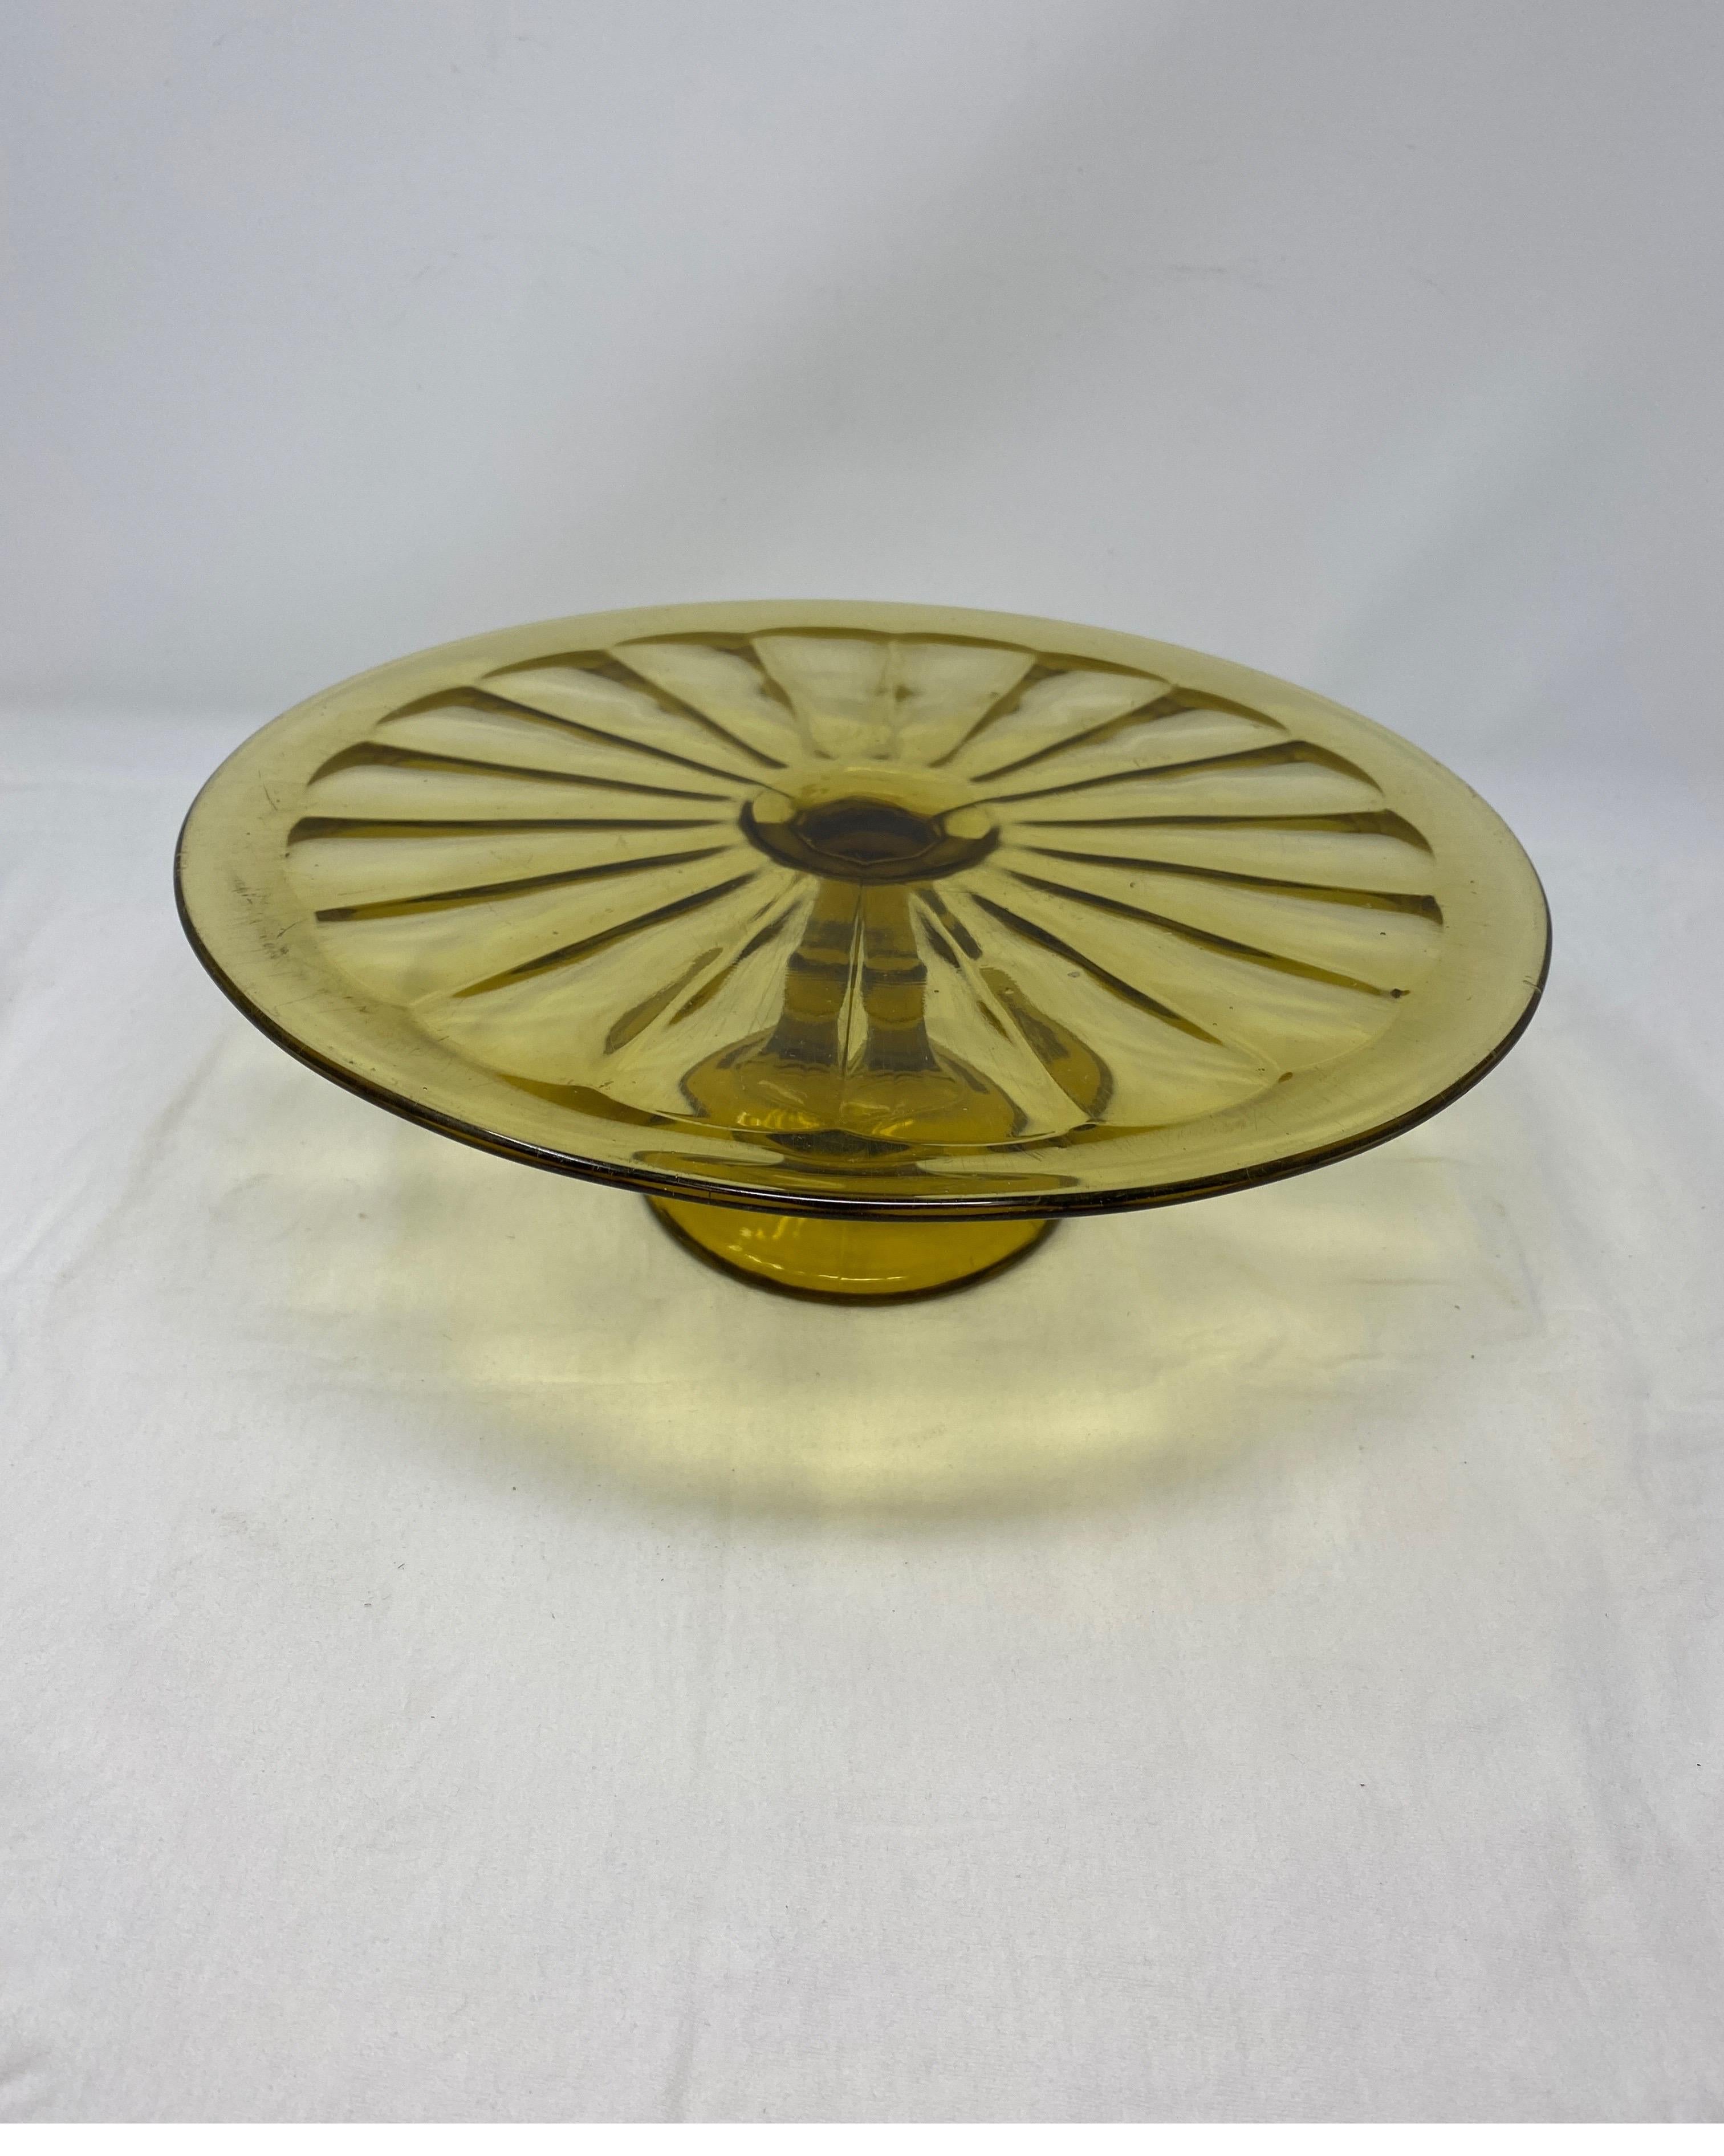 This antique glass cake patisserie stand sits on a glass pedestal base. Perfect for displaying your culinary confections, this piece’s simple, elegant look will mix with any decor.